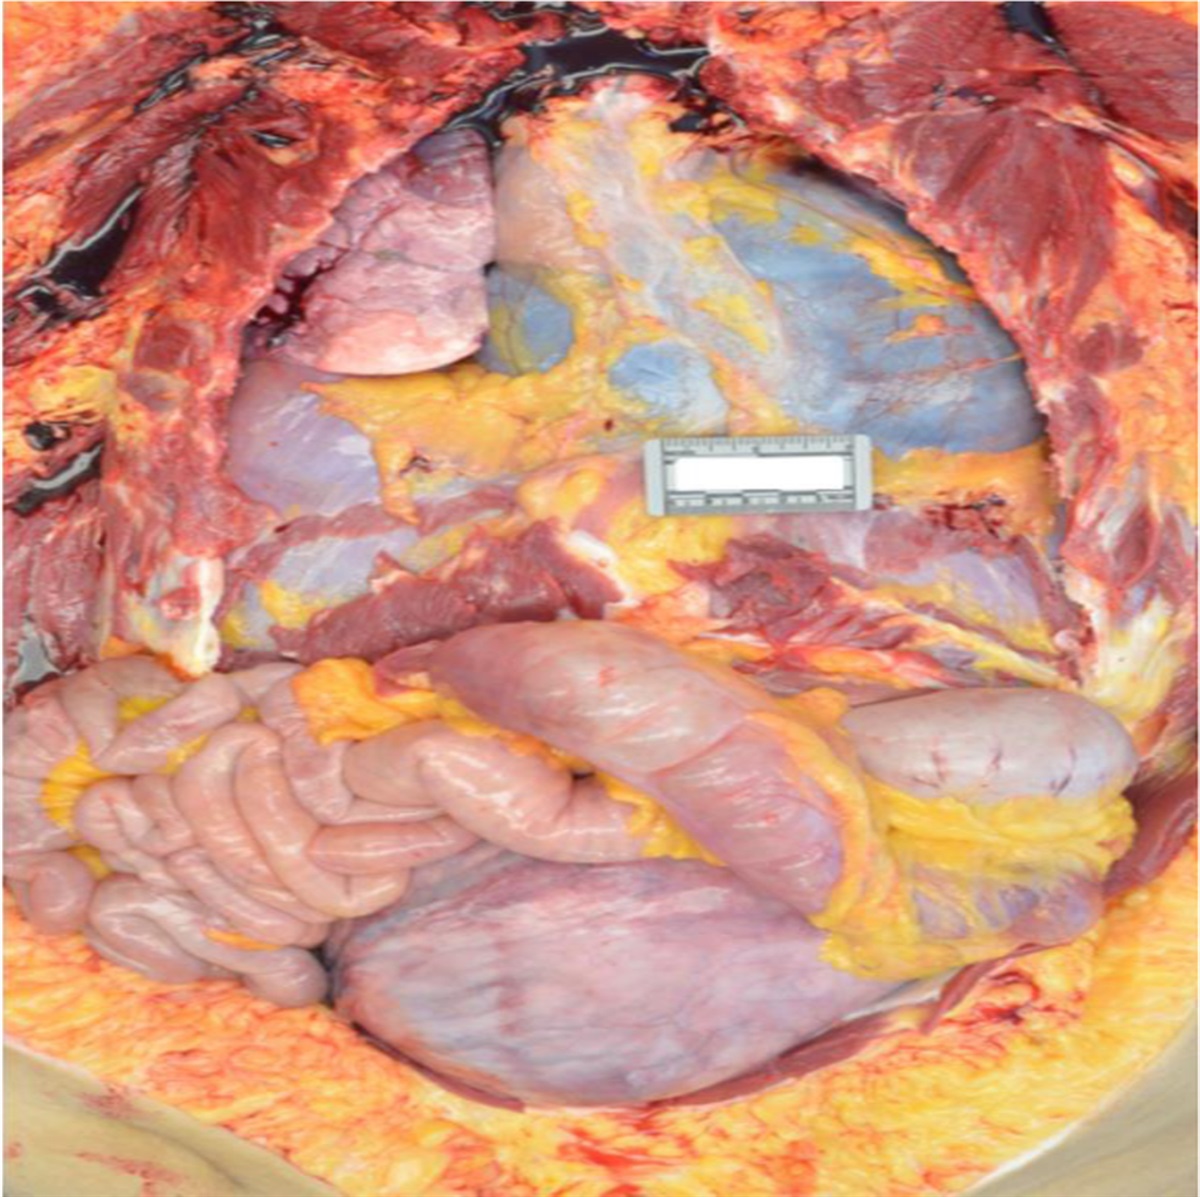 Ruptured Aortic Dissection in an Unrecognized, Late-Term Intrauterine Pregnancy